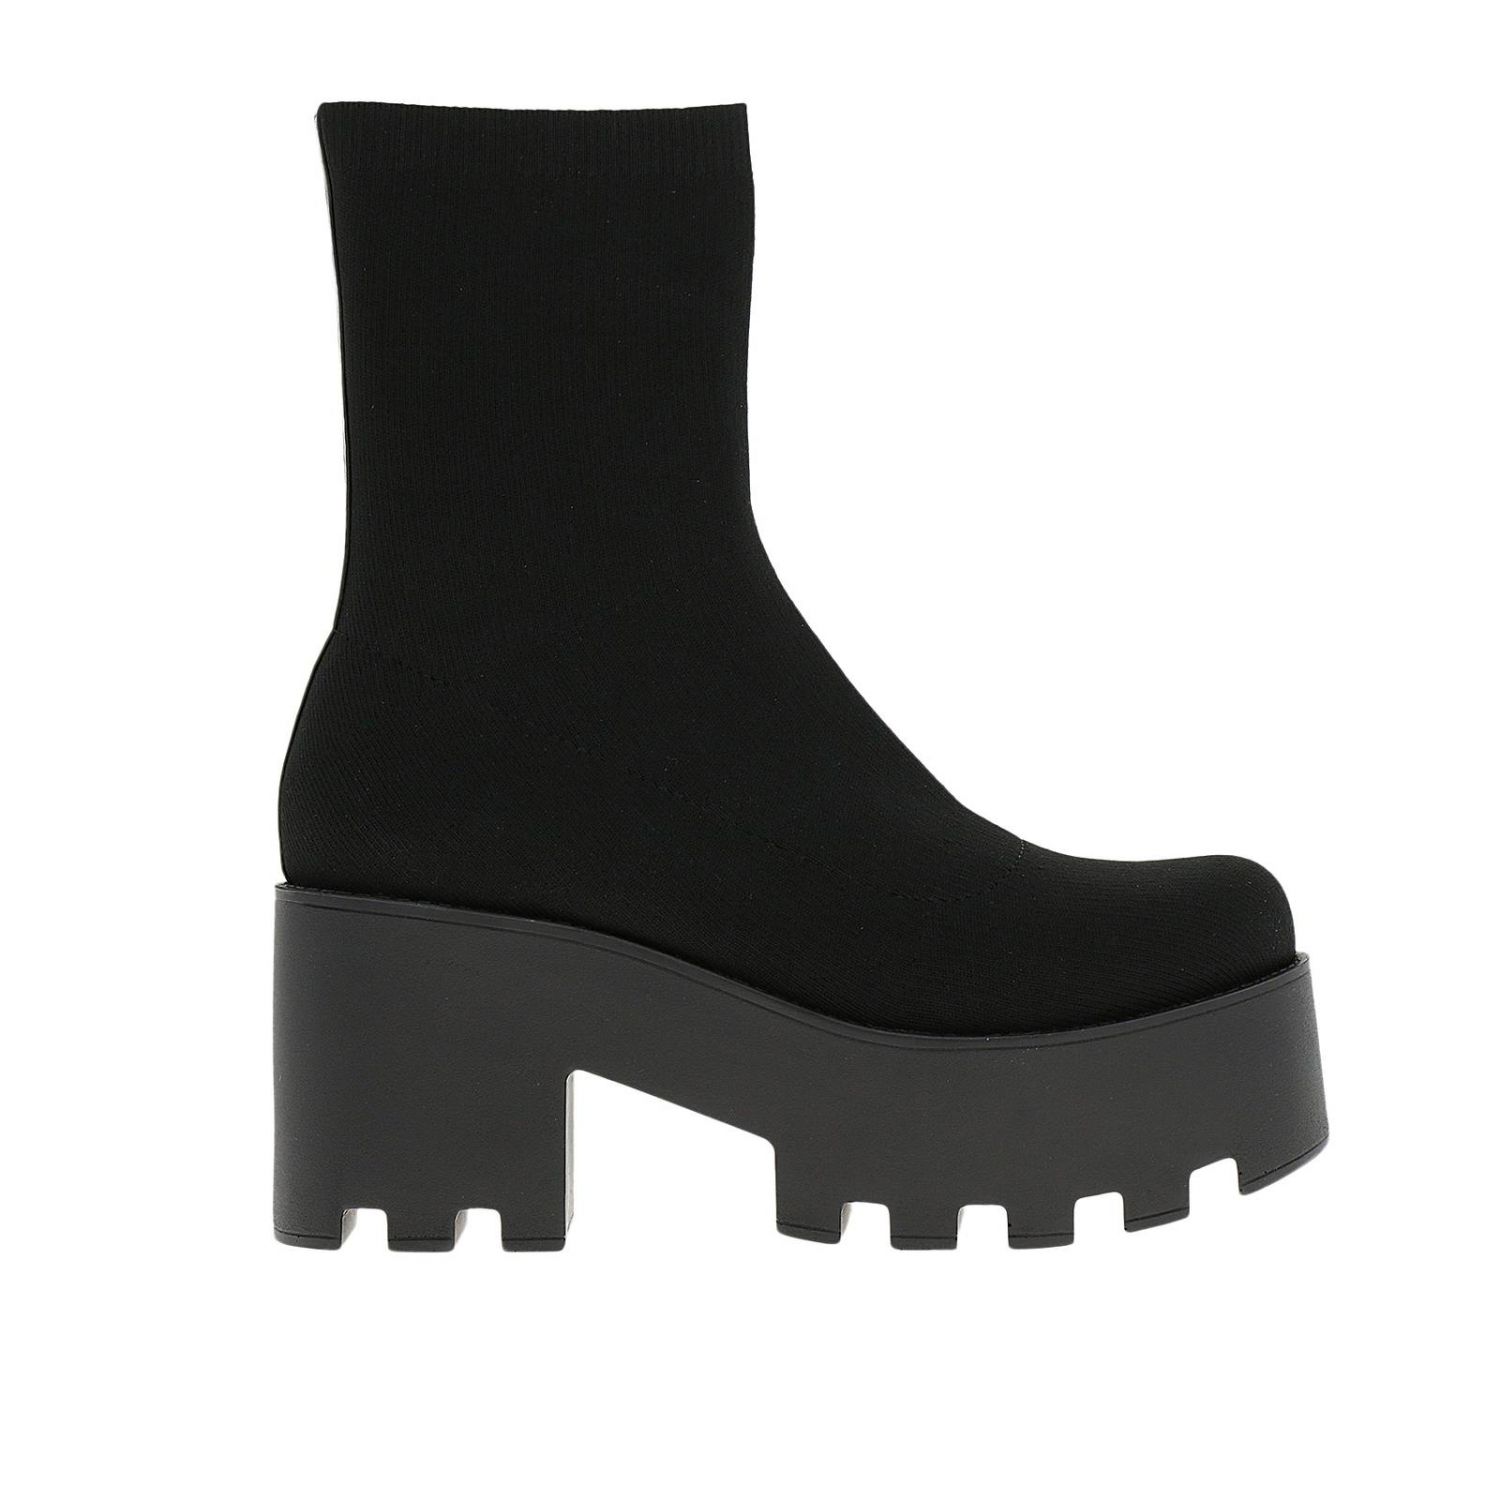 Heeled Ankle Boots Heeled Ankle Boots Women Windsorsmith Asap